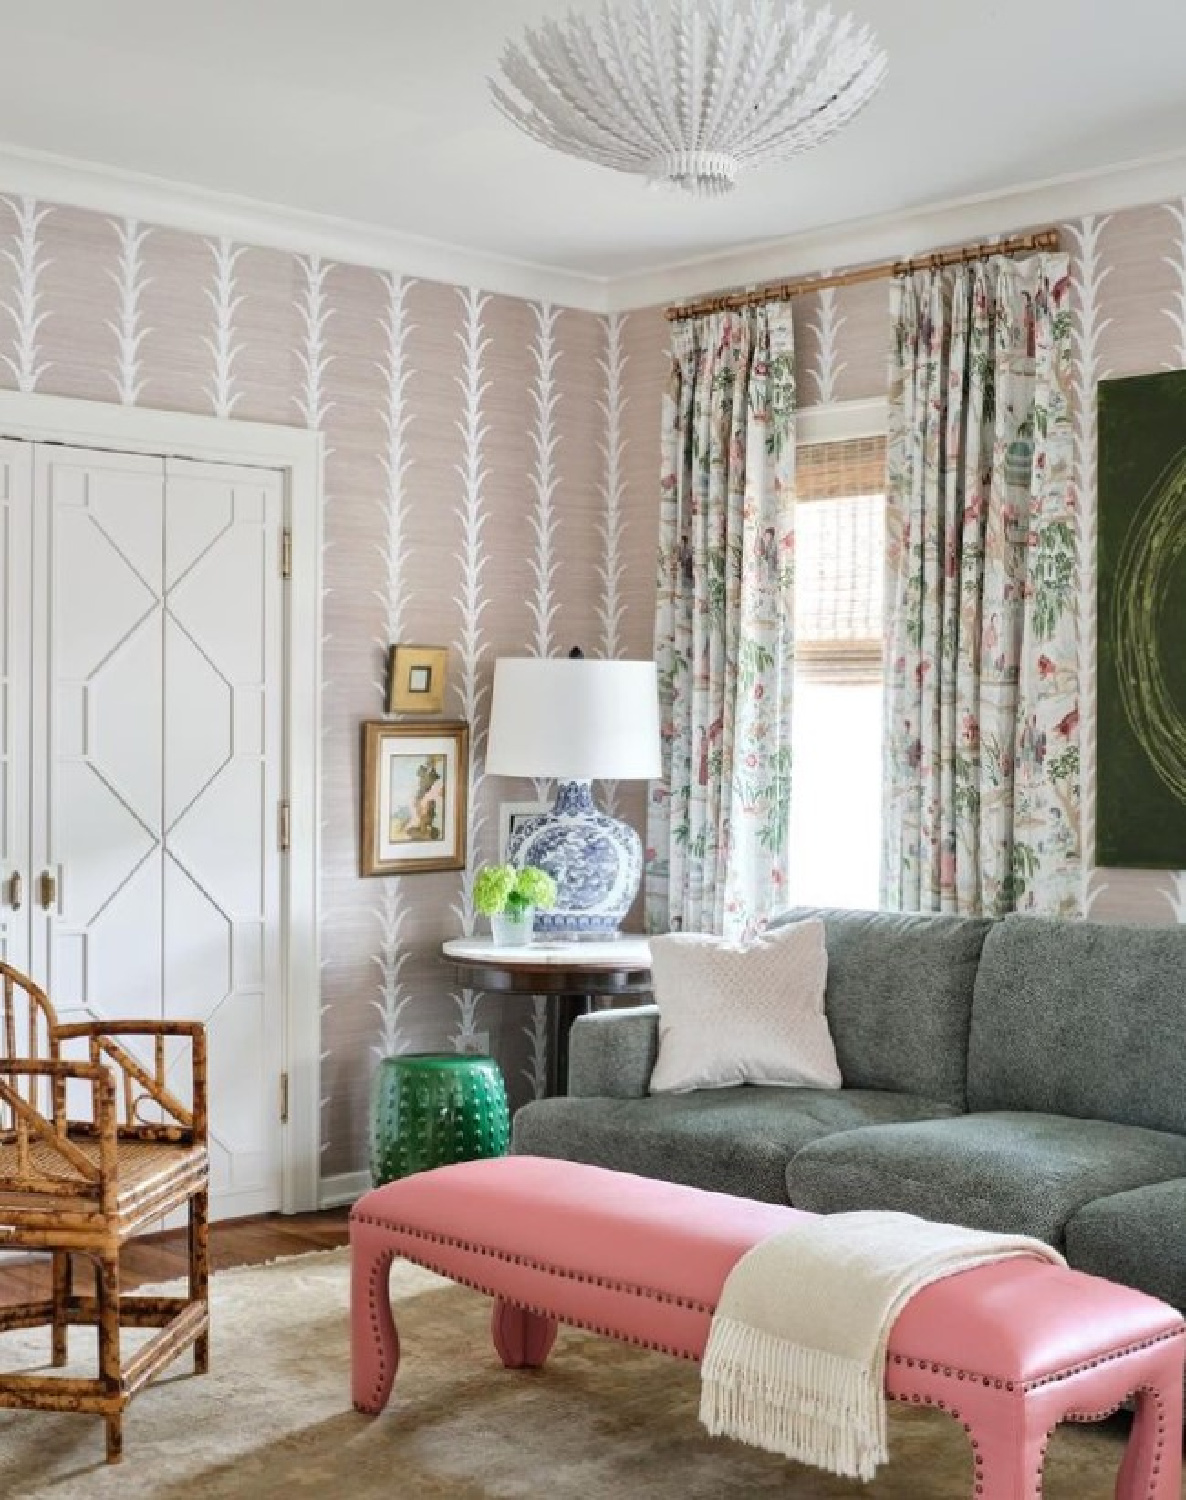 Keeping room in Maria E. Beck's 1931 renovated Texas home. #traditionalstyle #sophisticatedinterior#timelessdesign